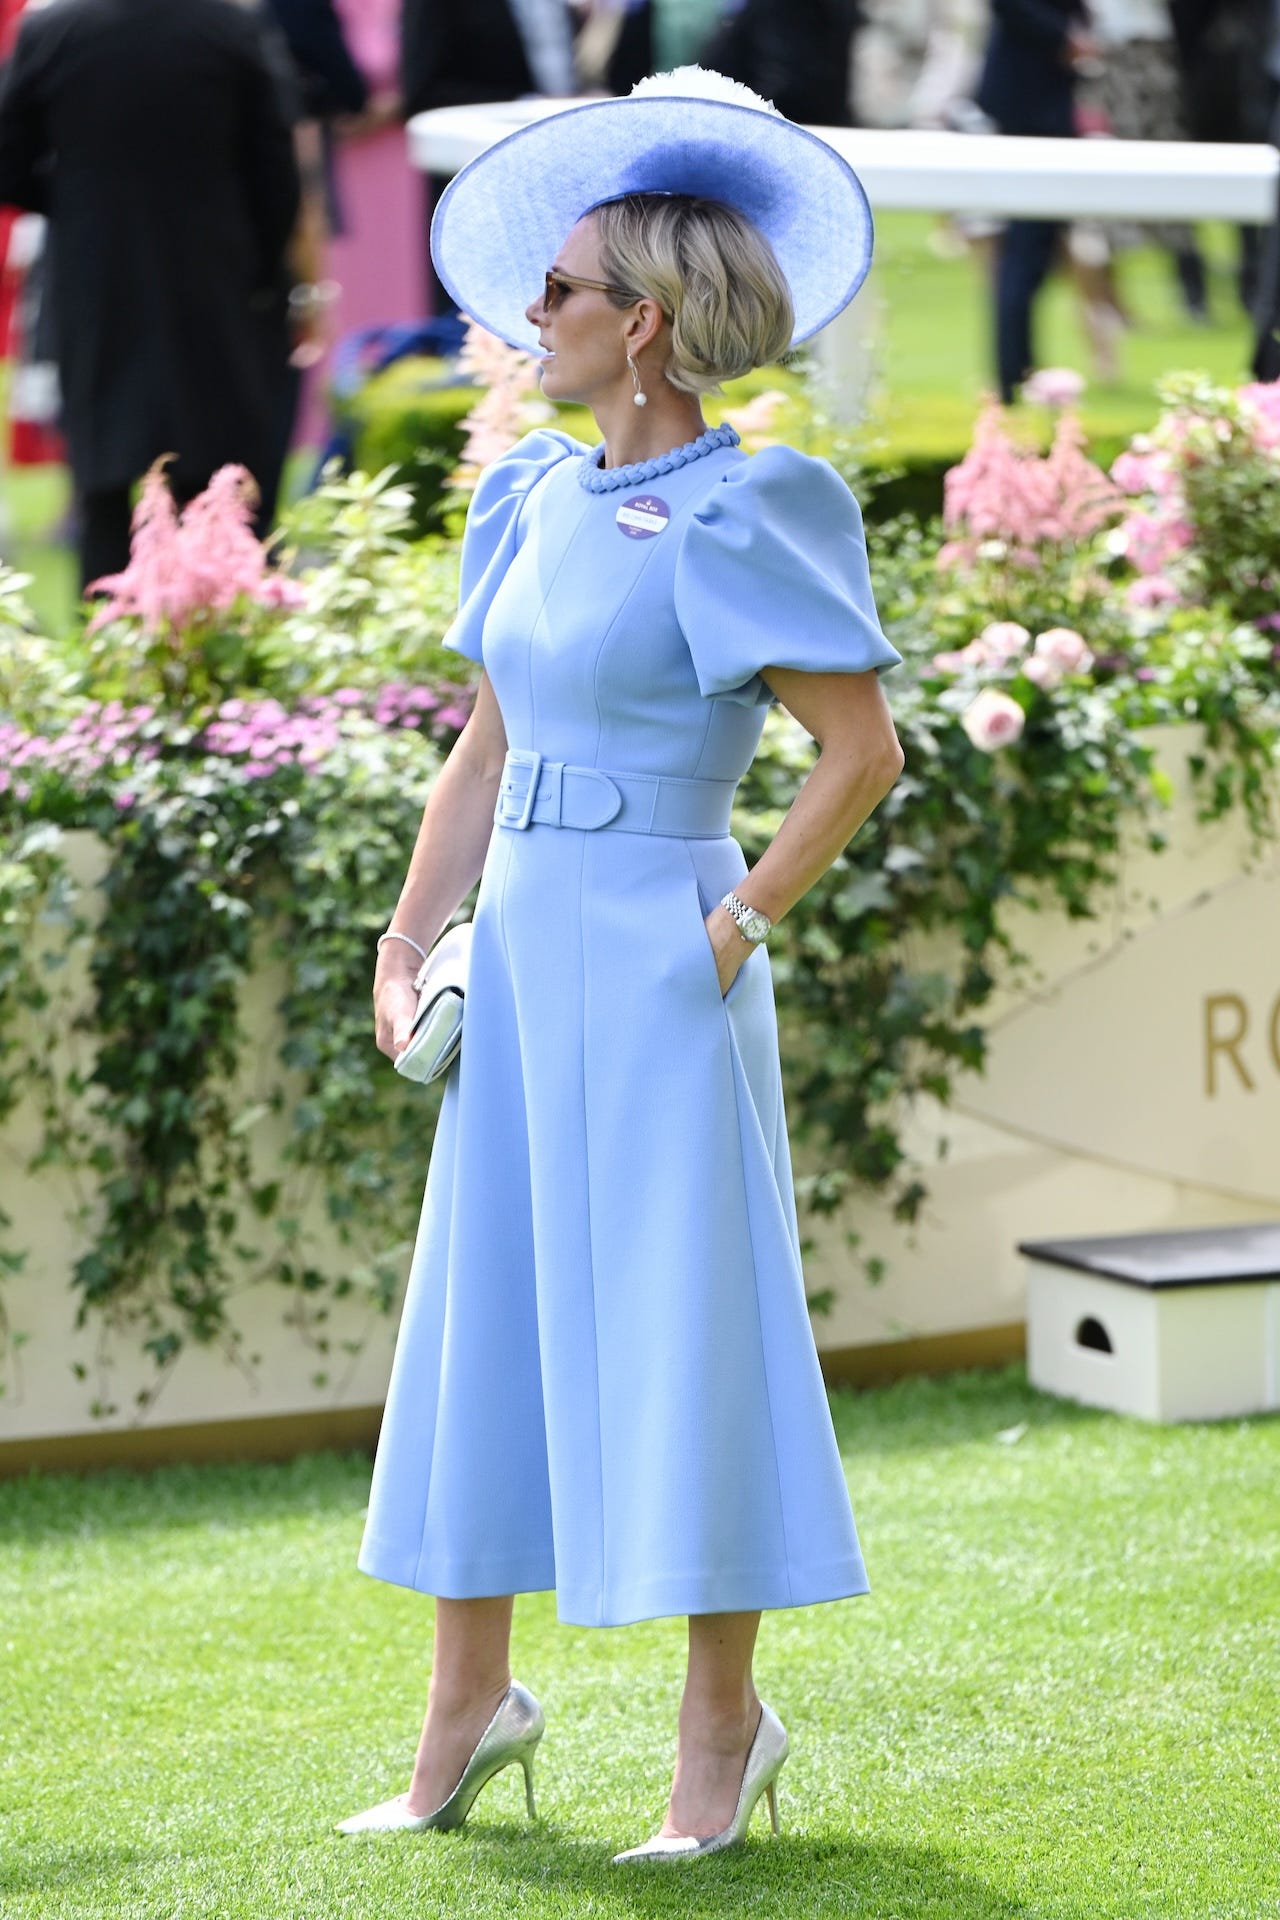 <p>Her latest look consisted of a <a href="https://www.primmsstyle.com/products/rebecca-vallance-puff-sleeve-mini"><span>Rebecca Vallance</span></a><span> baby-blue midi dress with puff sleeves, a knot design around the neckline, and a built-in belt. Zara paired the dress, which was on sale for $367, with light pumps, a silver watch and jewelry, a clutch, and a coordinating fascinator. </span></p>